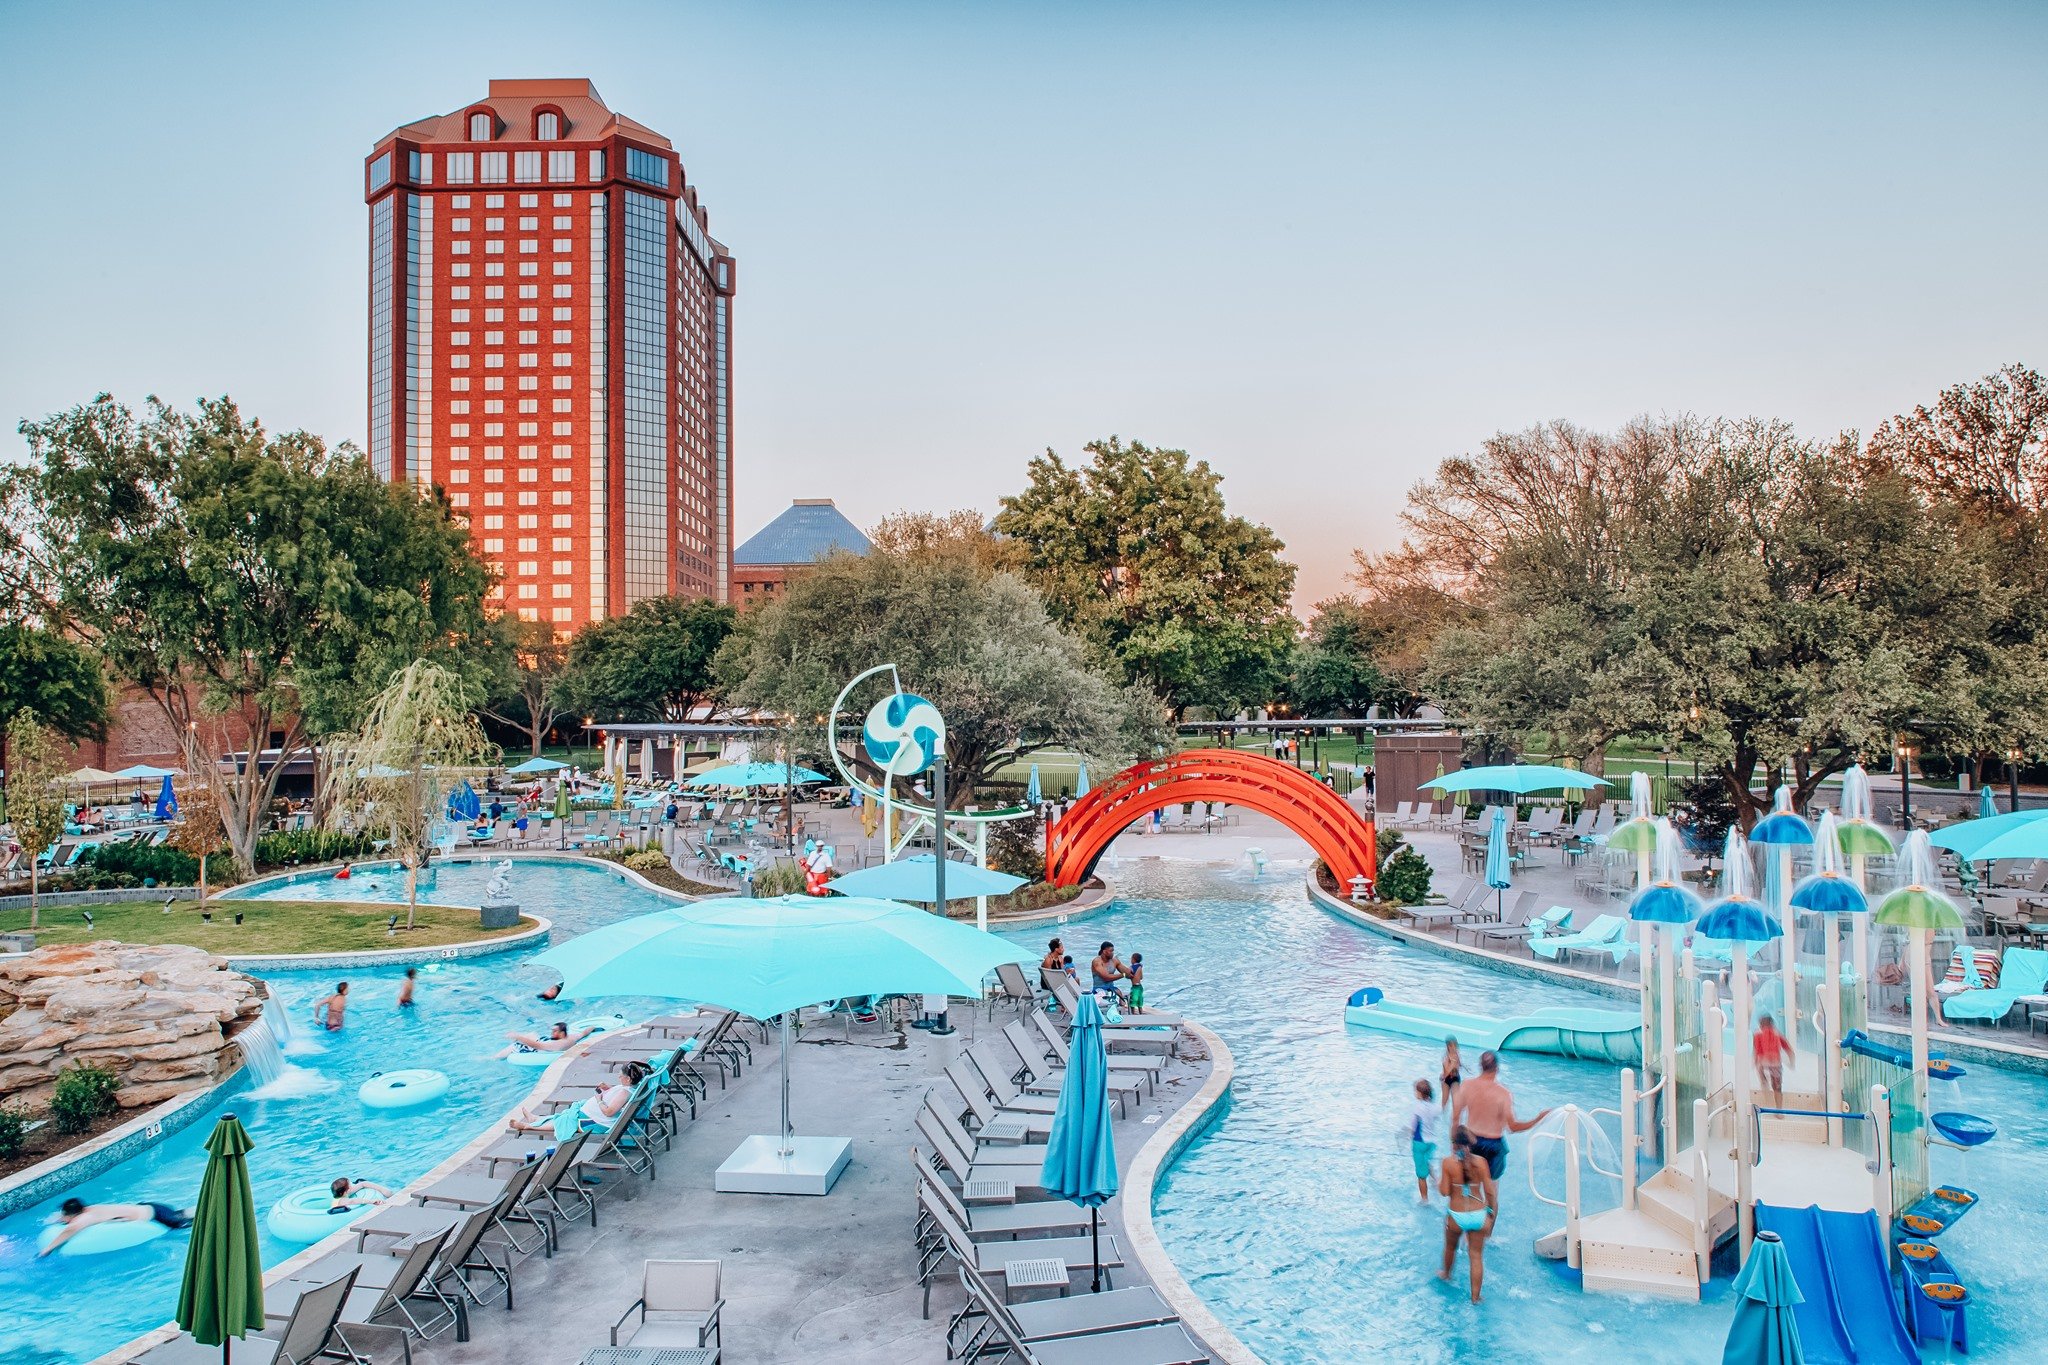 10 Best Hotels With Lazy Rivers In Texas For 2021 Trips To Discover